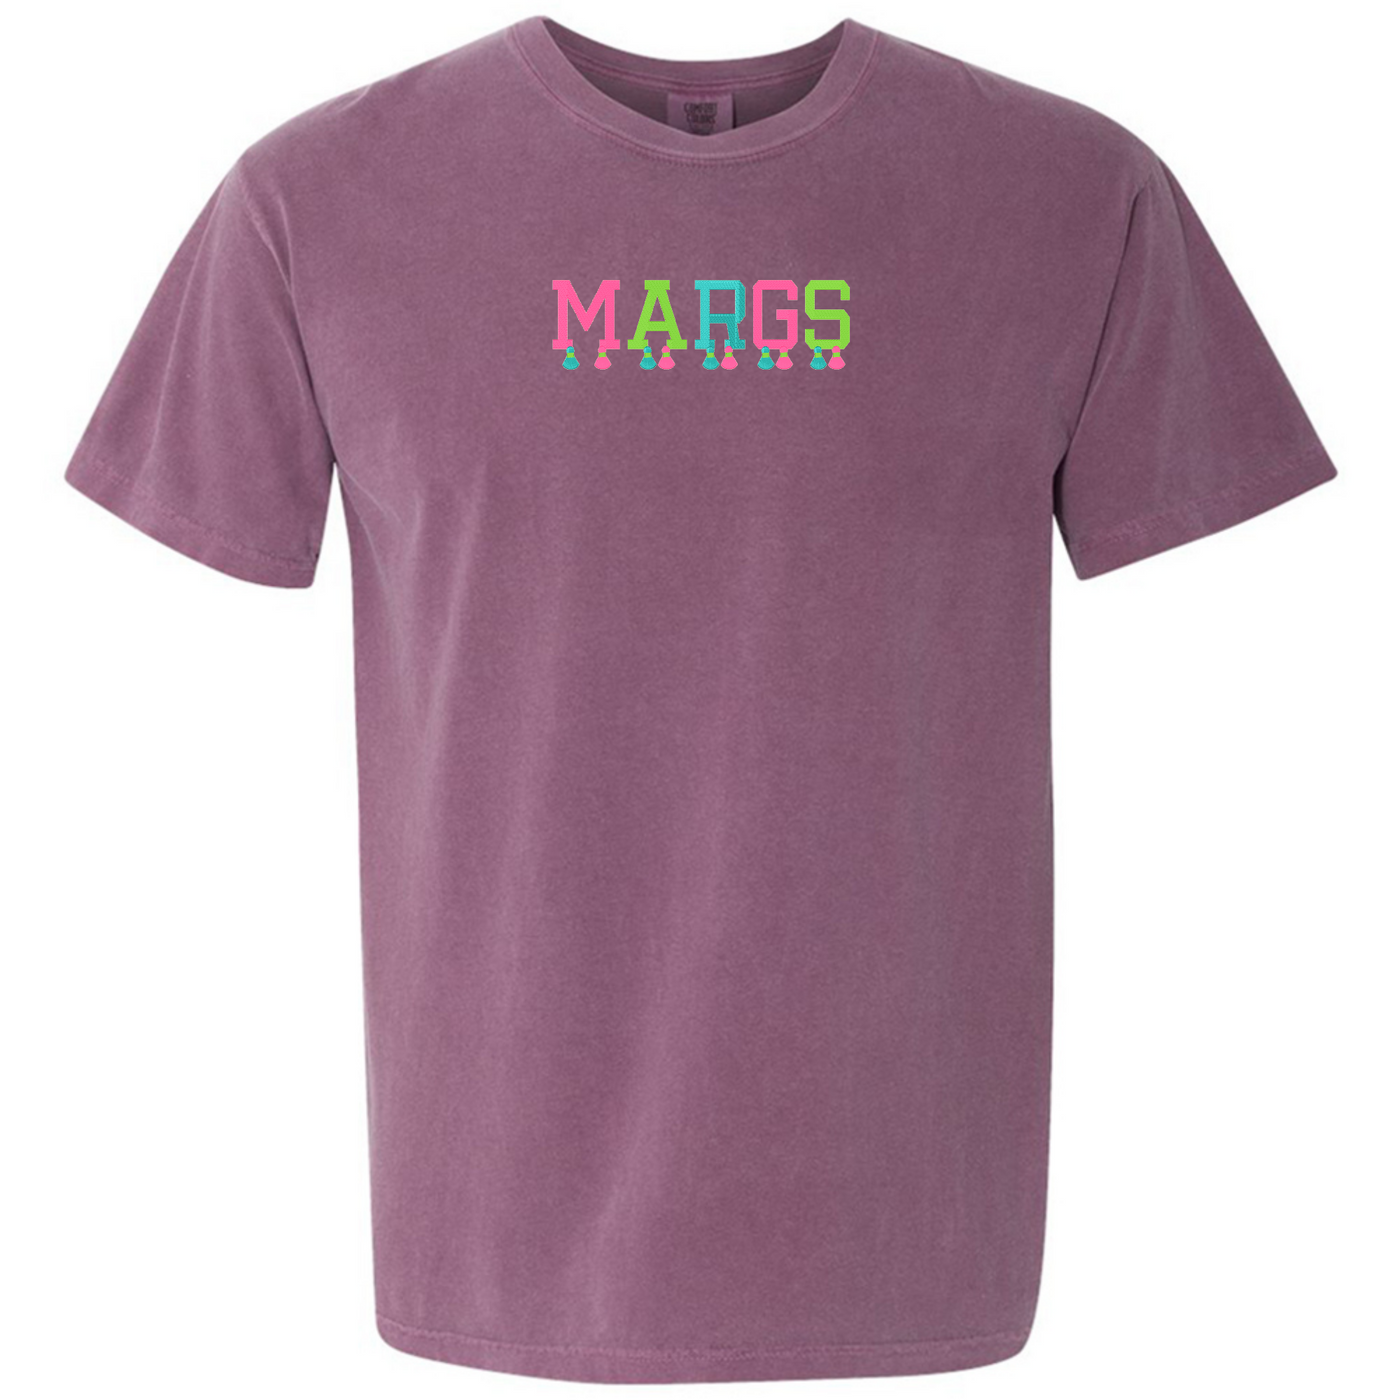 Embroidered Tasseled 'Margs' T-Shirt